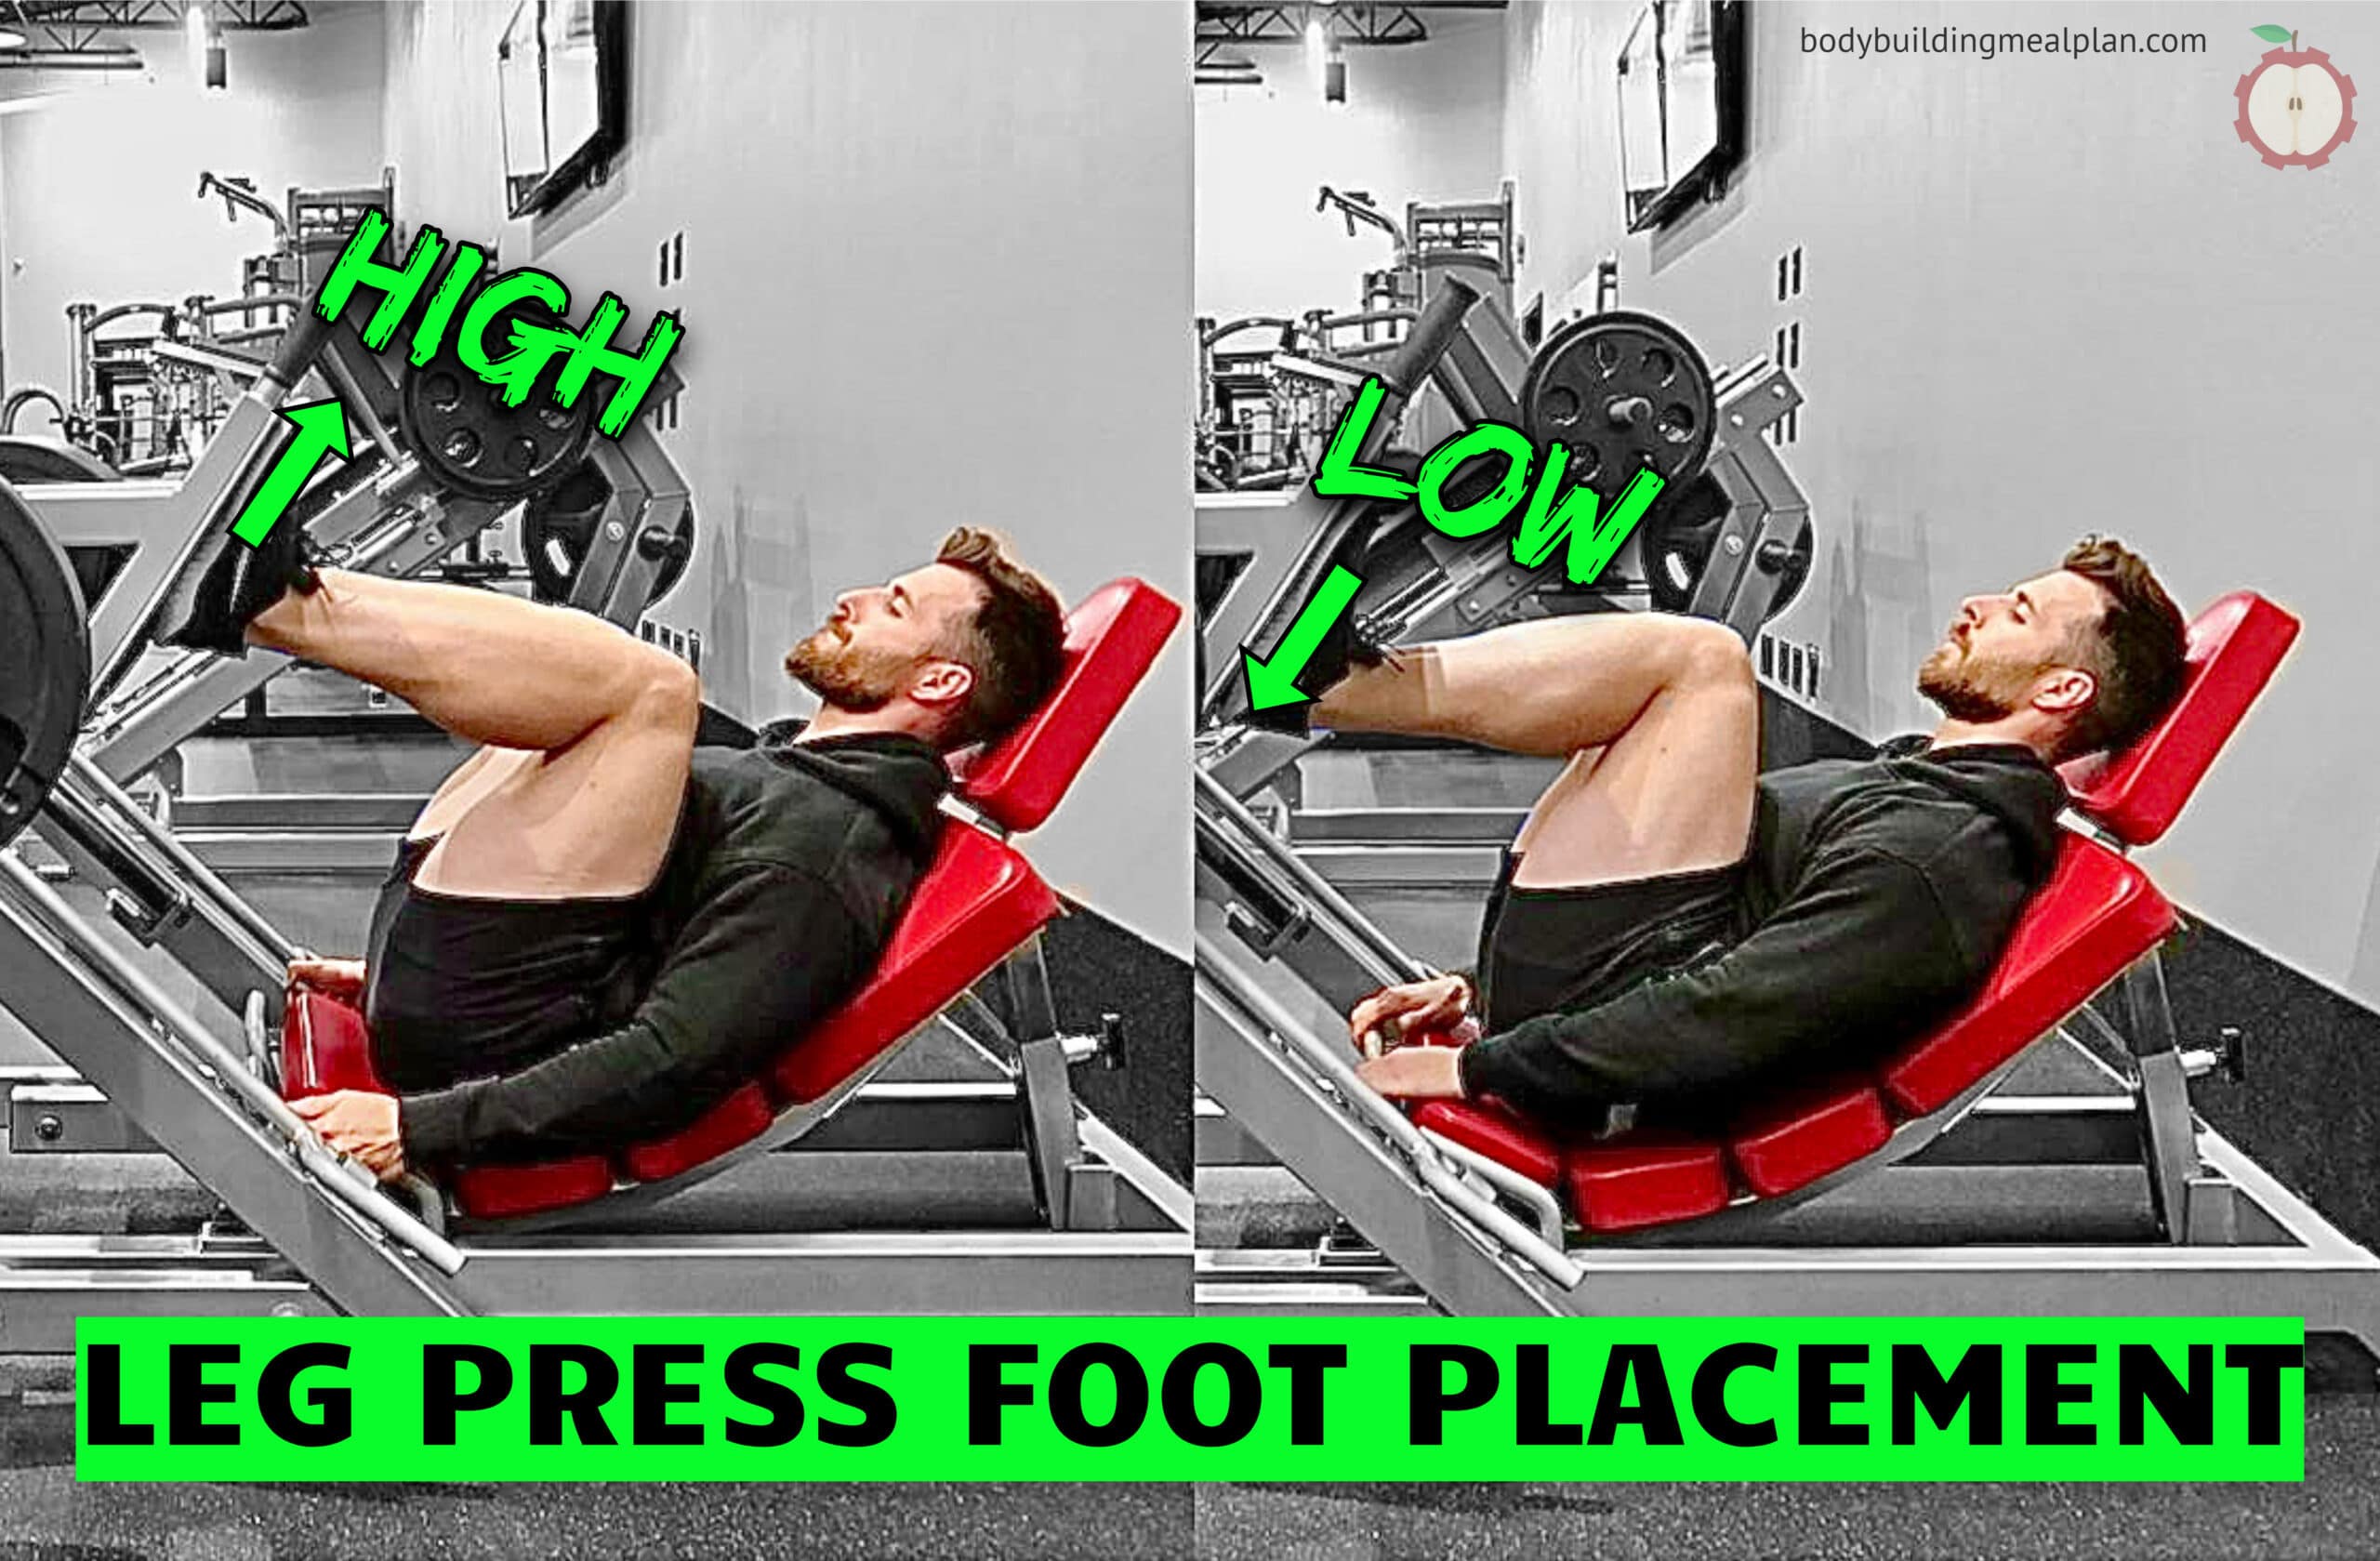 Does Foot Position Matter During a Leg Press?